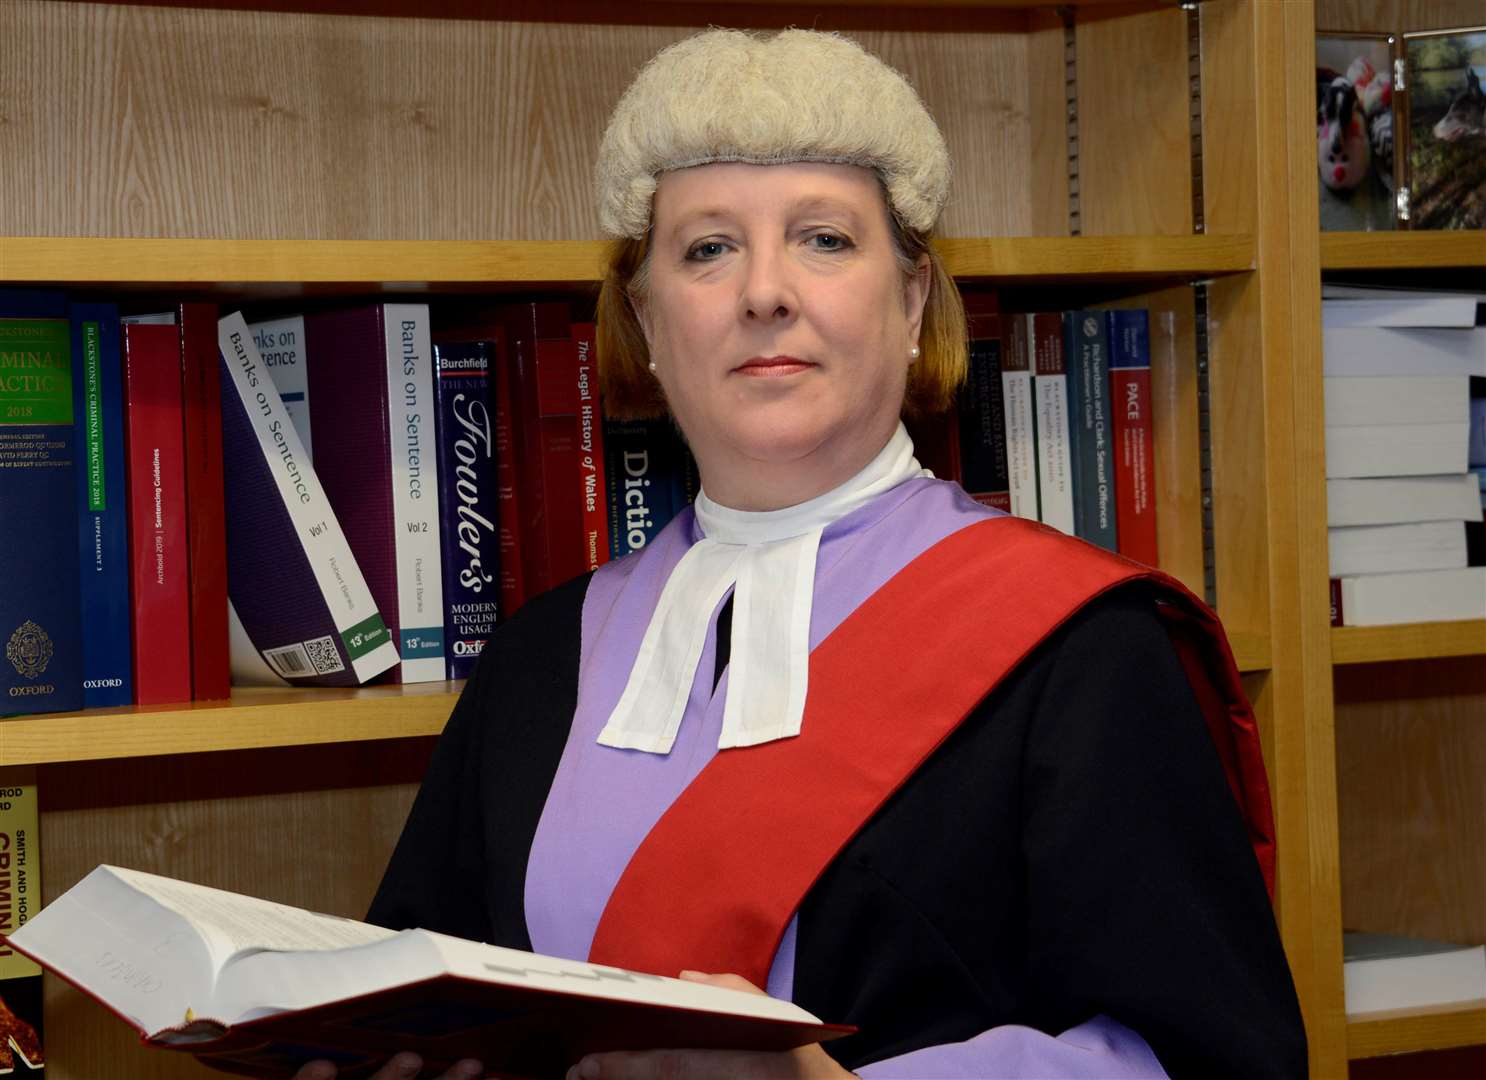 Judge Catherine Brown praised the victim for her bravery